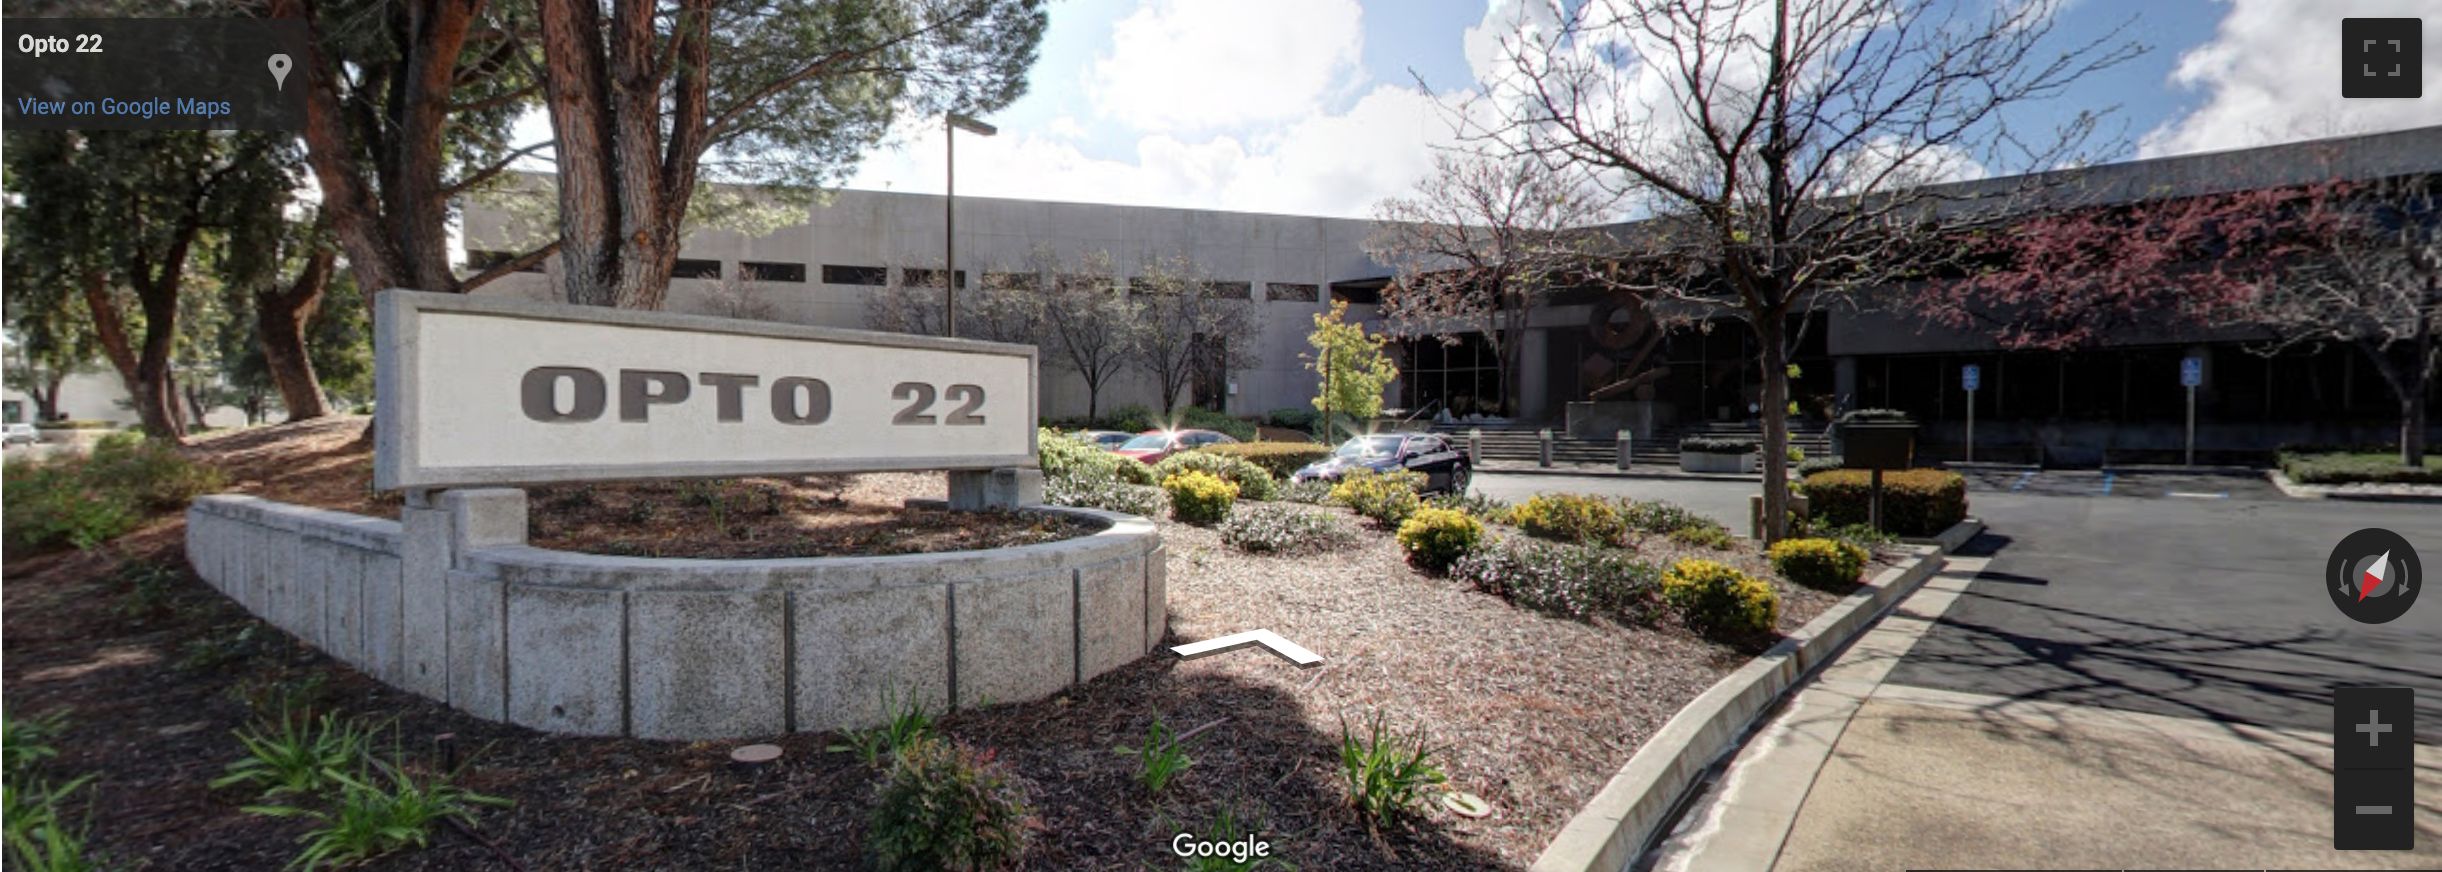 Google Street Maps - Front of Opto 22 headquarters building